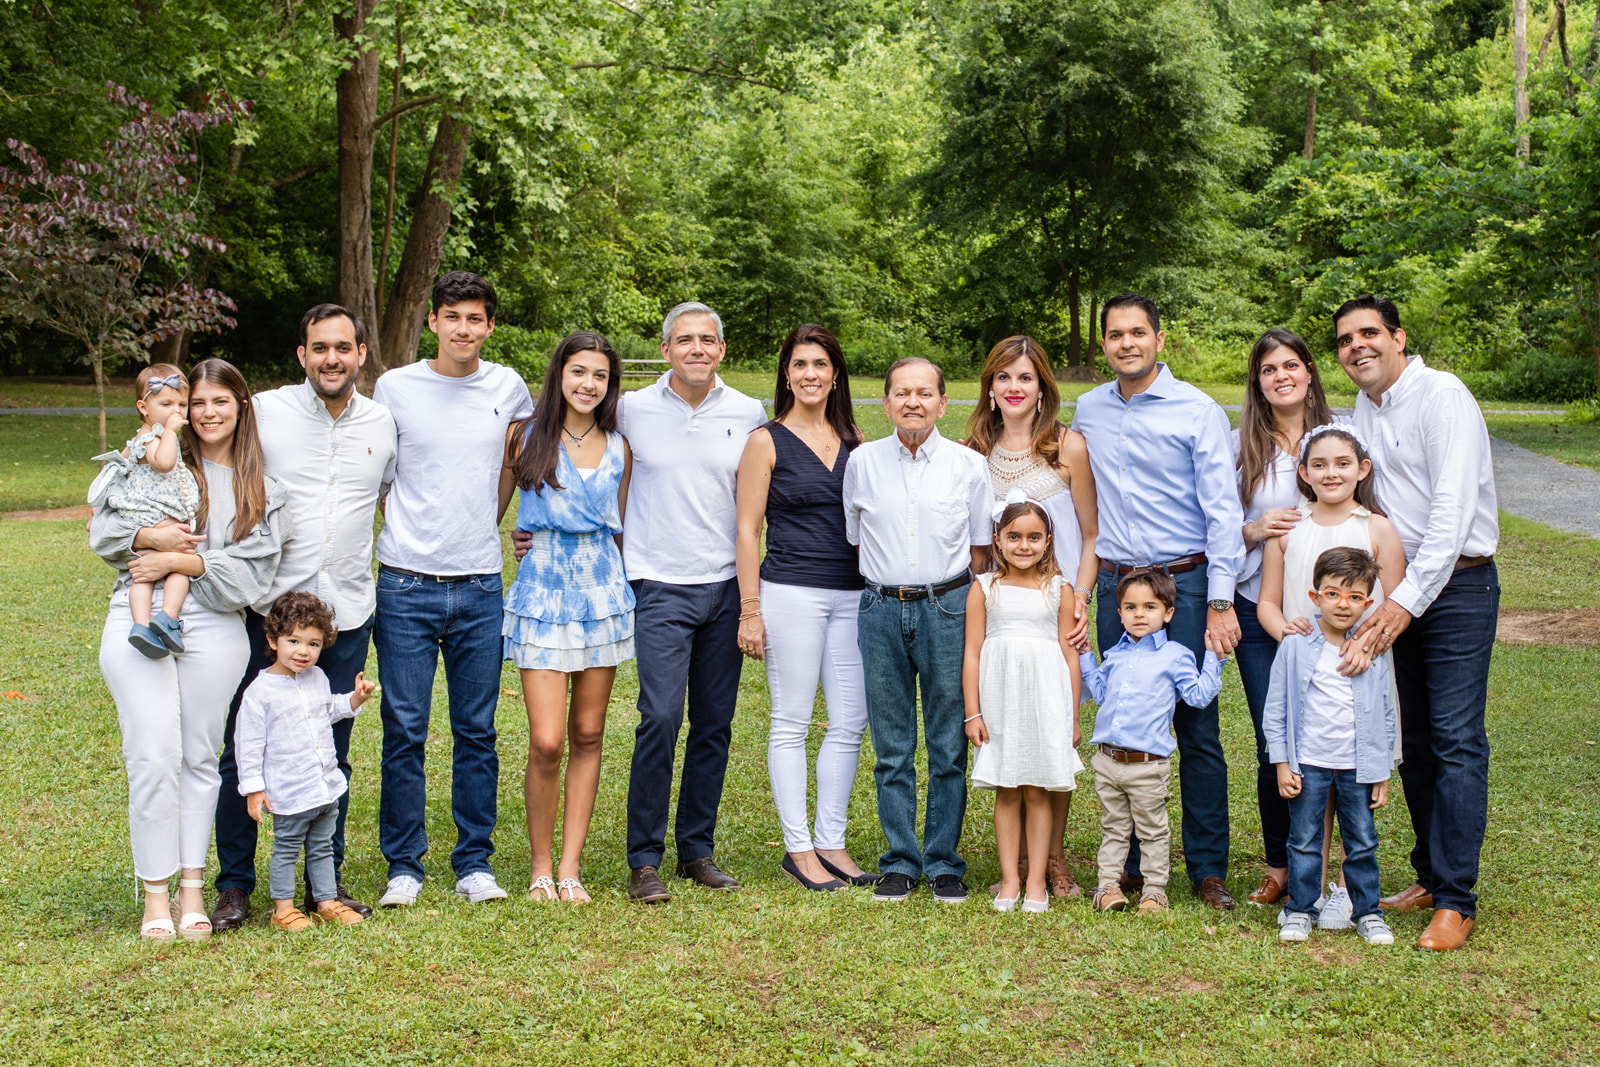 Extended family of 17 people and 3 generations with coordinated blue and white outfits in Atlanta park Sandy Spring Laure photography